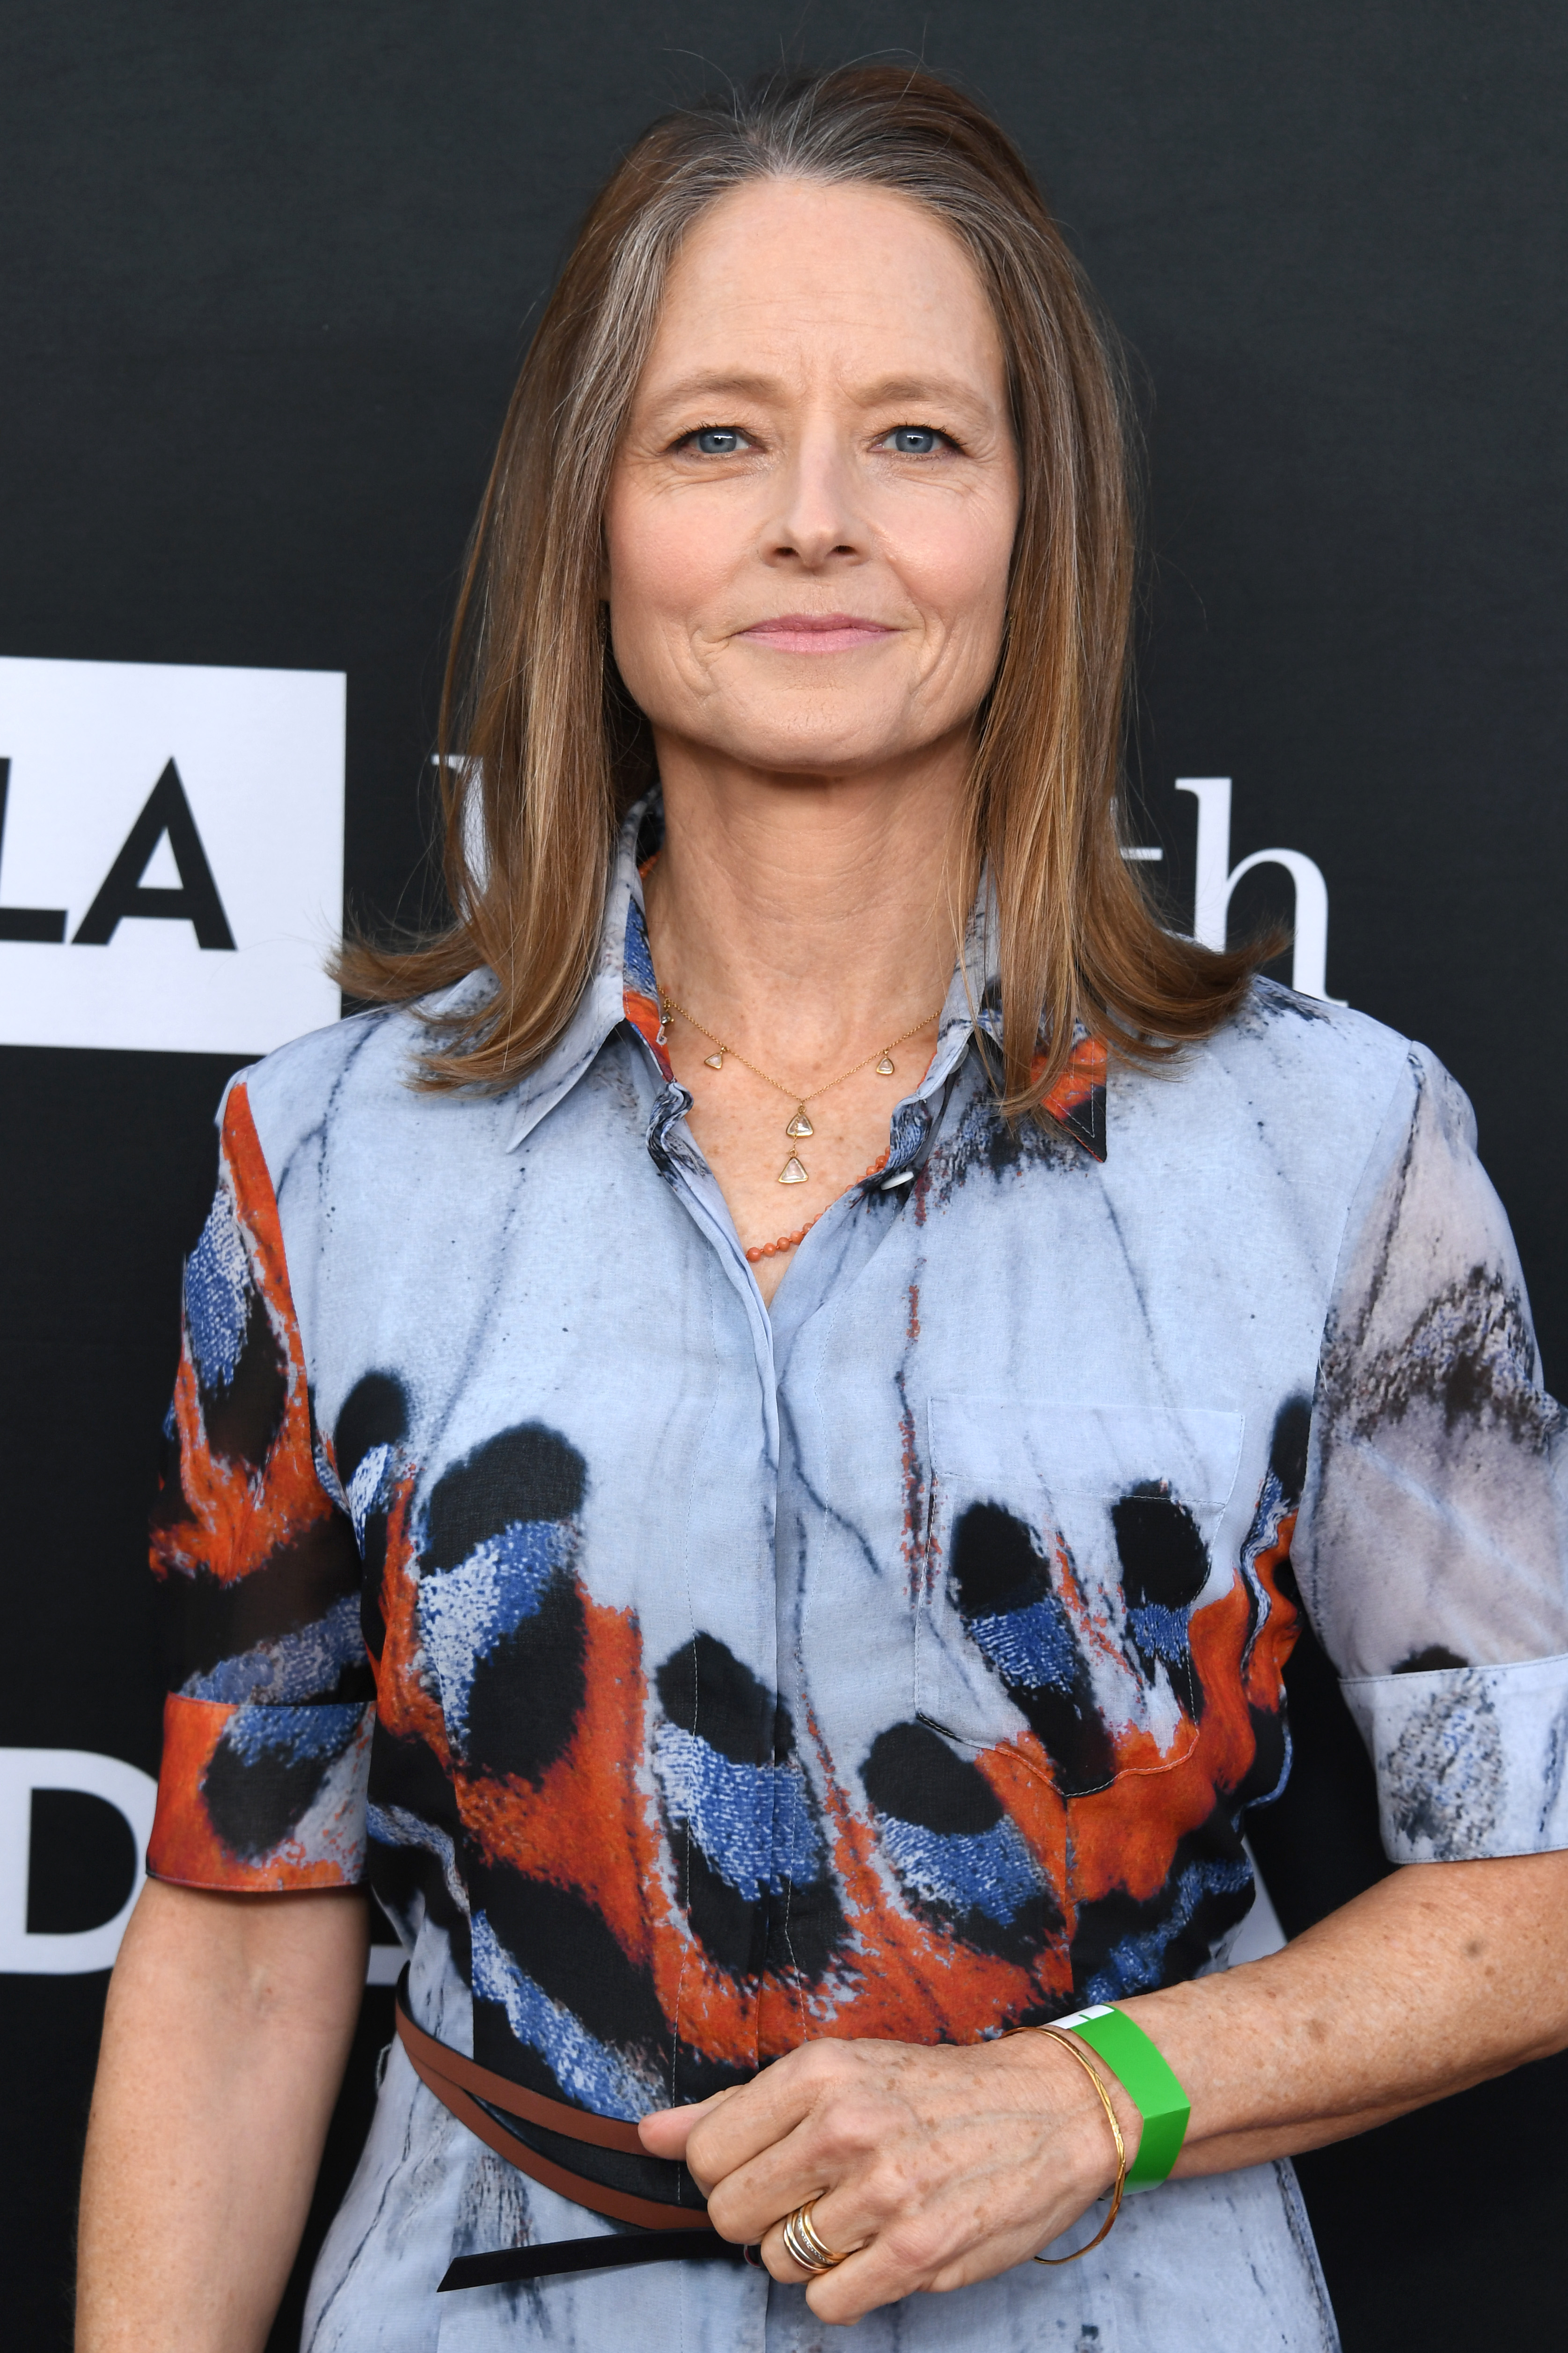 Jodie Foster at the MPTF's "100 Years Of Hollywood: A Celebration of Service" in West Hollywood, California on June 18, 2022 | Source: Getty Images